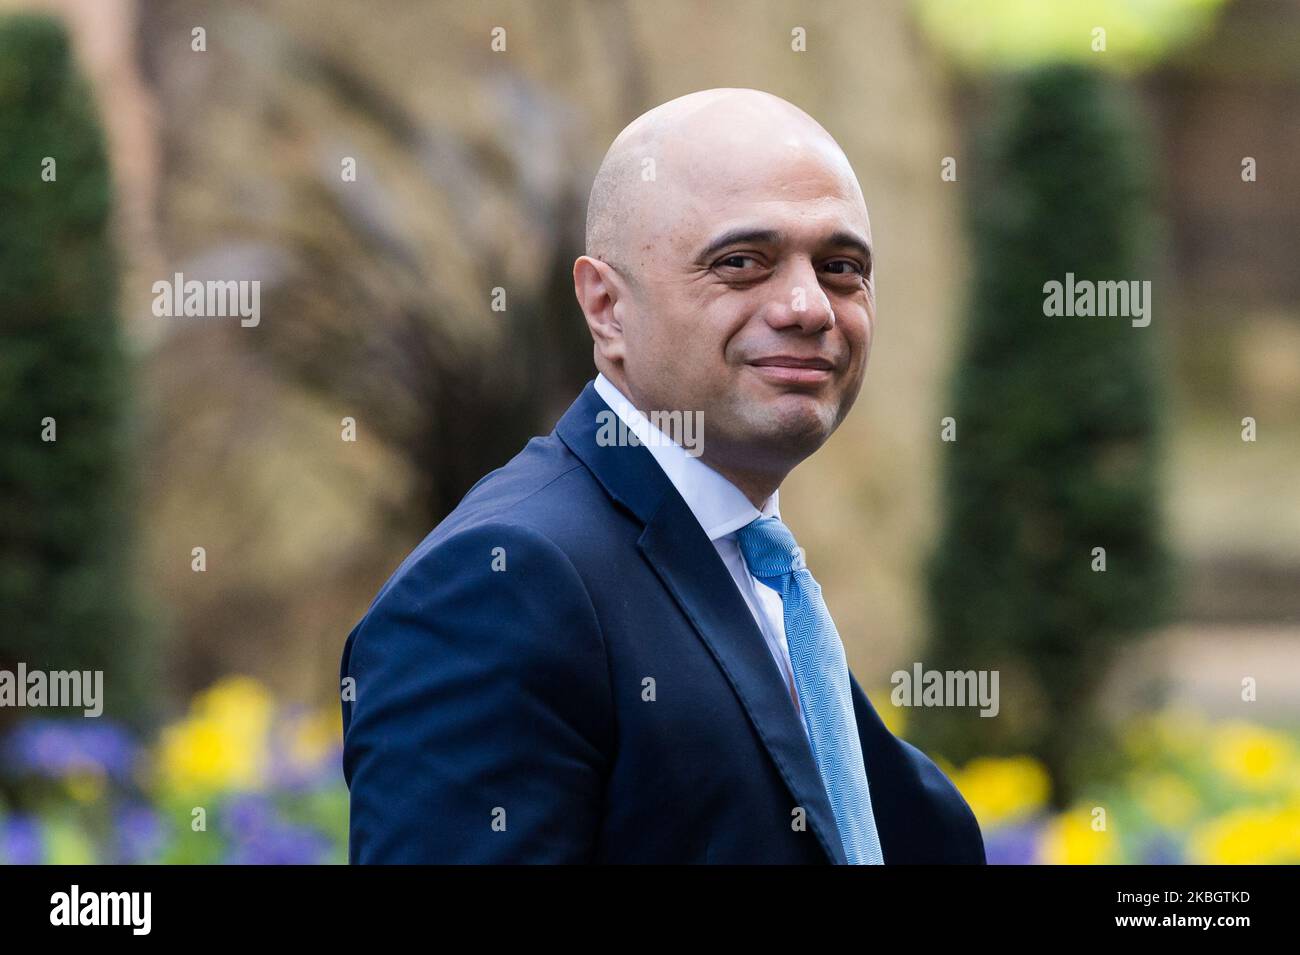 Chancellor of the Exchequer Sajid Javid leaves Downing Street for PMQs at the House of Commons on 12 February, 2020 in London, England. (Photo by WIktor Szymanowicz/NurPhoto) Stock Photo